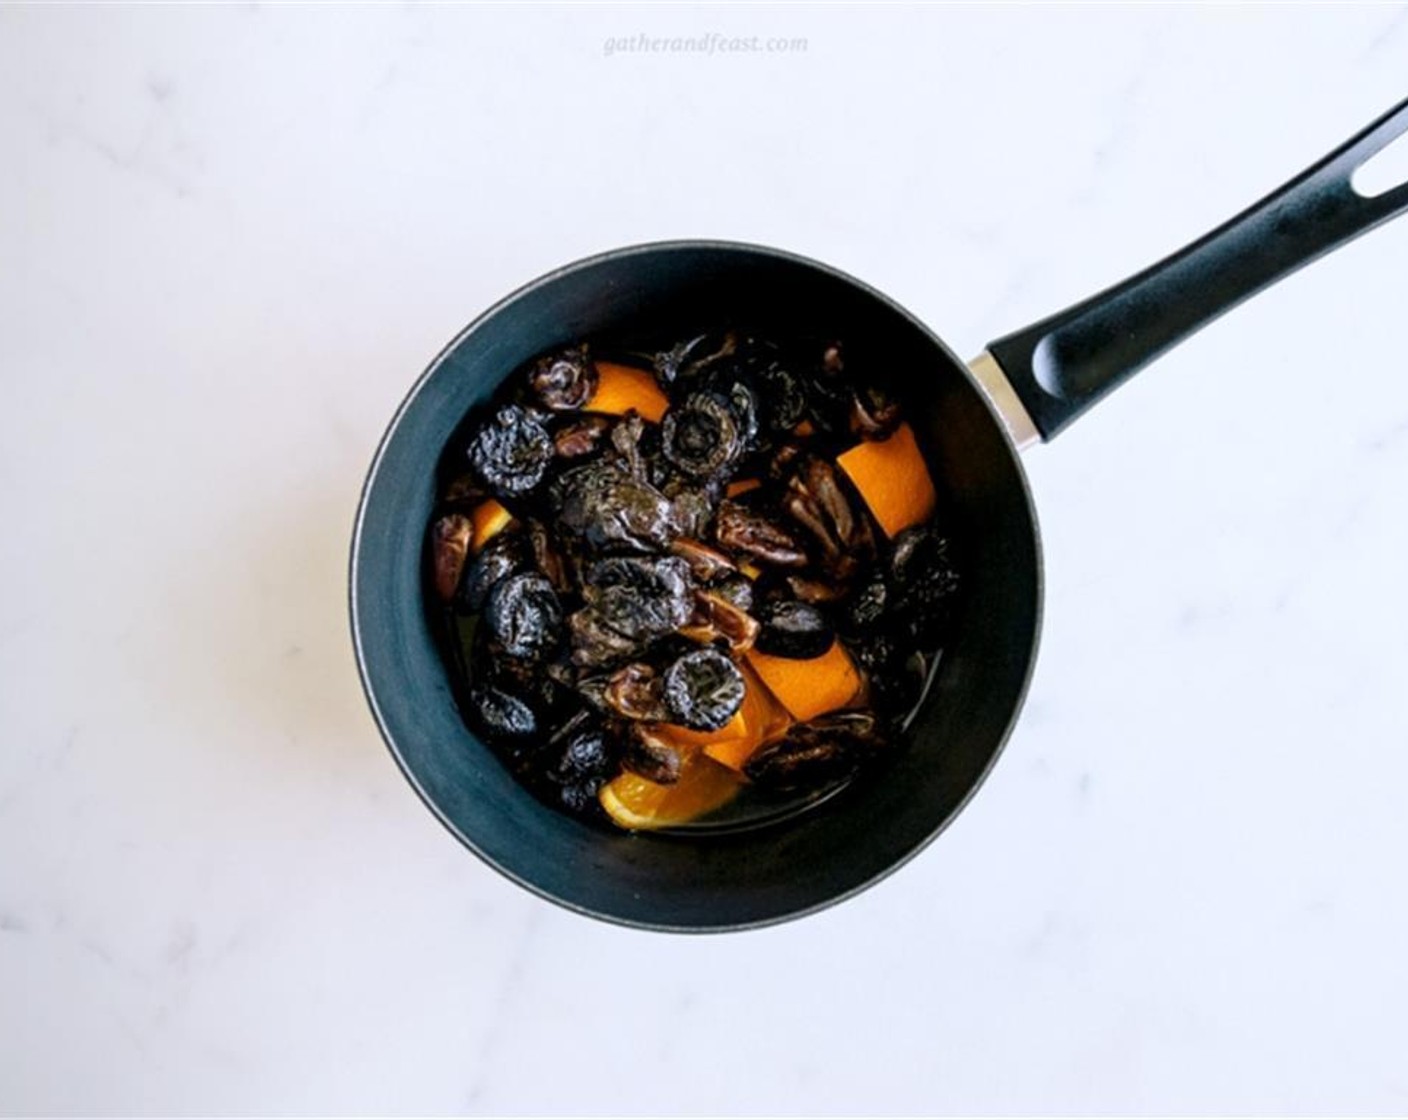 step 2 Combine pitted Dates (1 3/4 cups), pitted Prunes (1 2/3 cups), chopped orange slices and Water (1 1/4 cups) into a saucepan and bring to boil. Simmer for 10 minutes or until the water has evaporated and the dates have formed a thick paste.